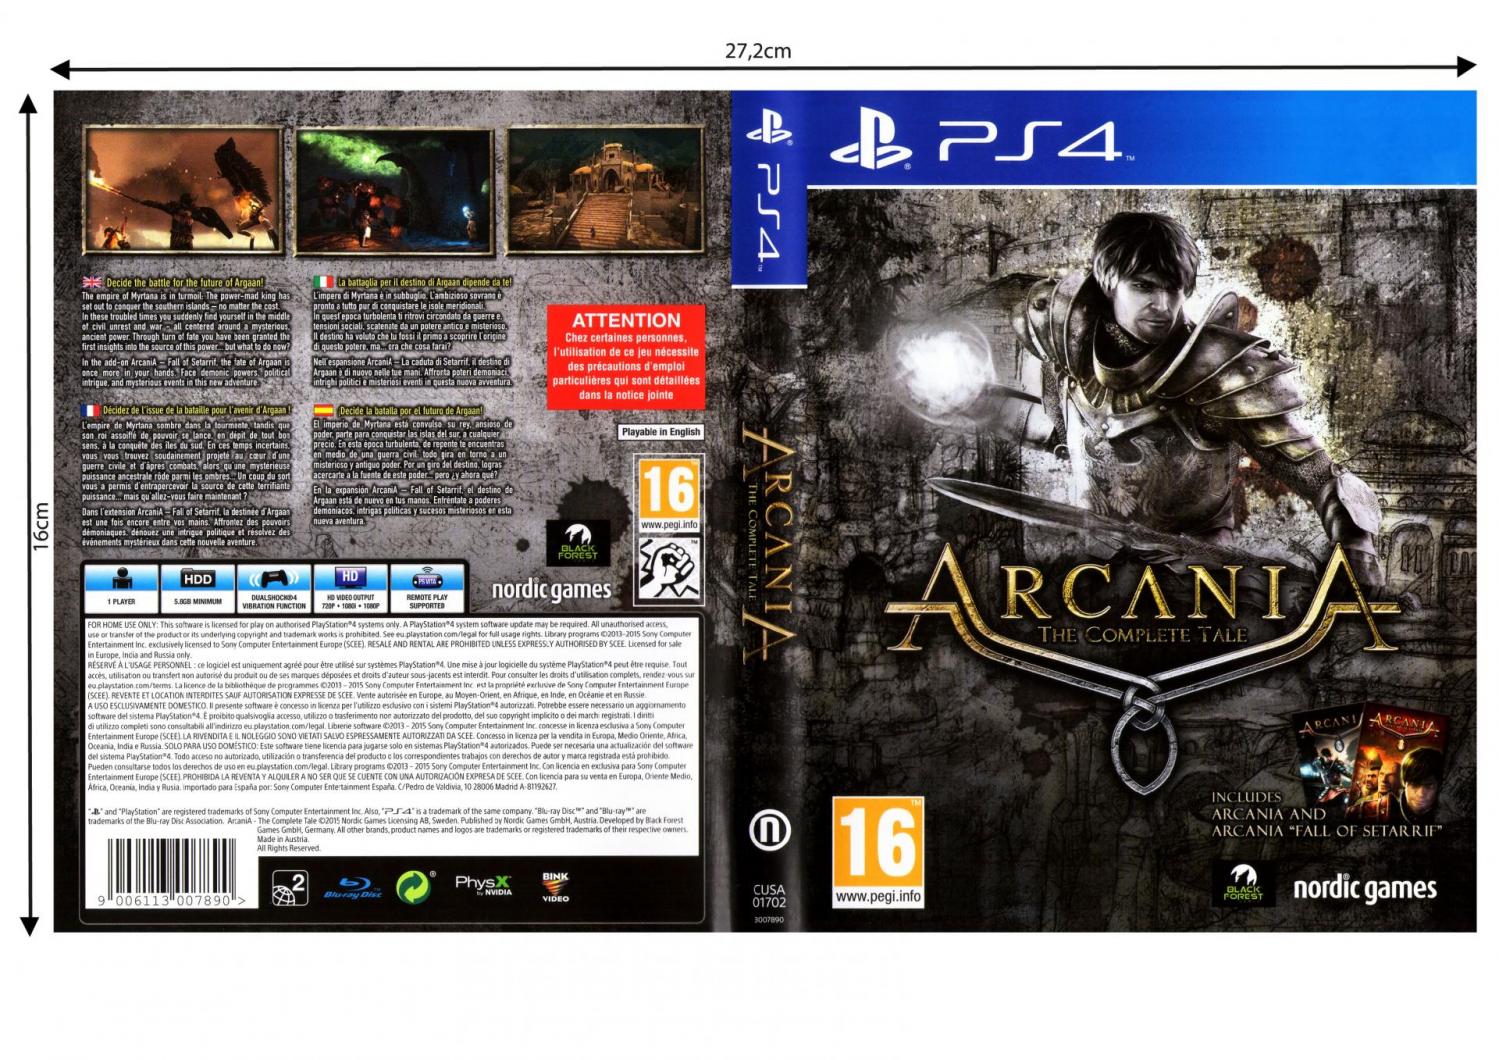 Arcania the complete tale